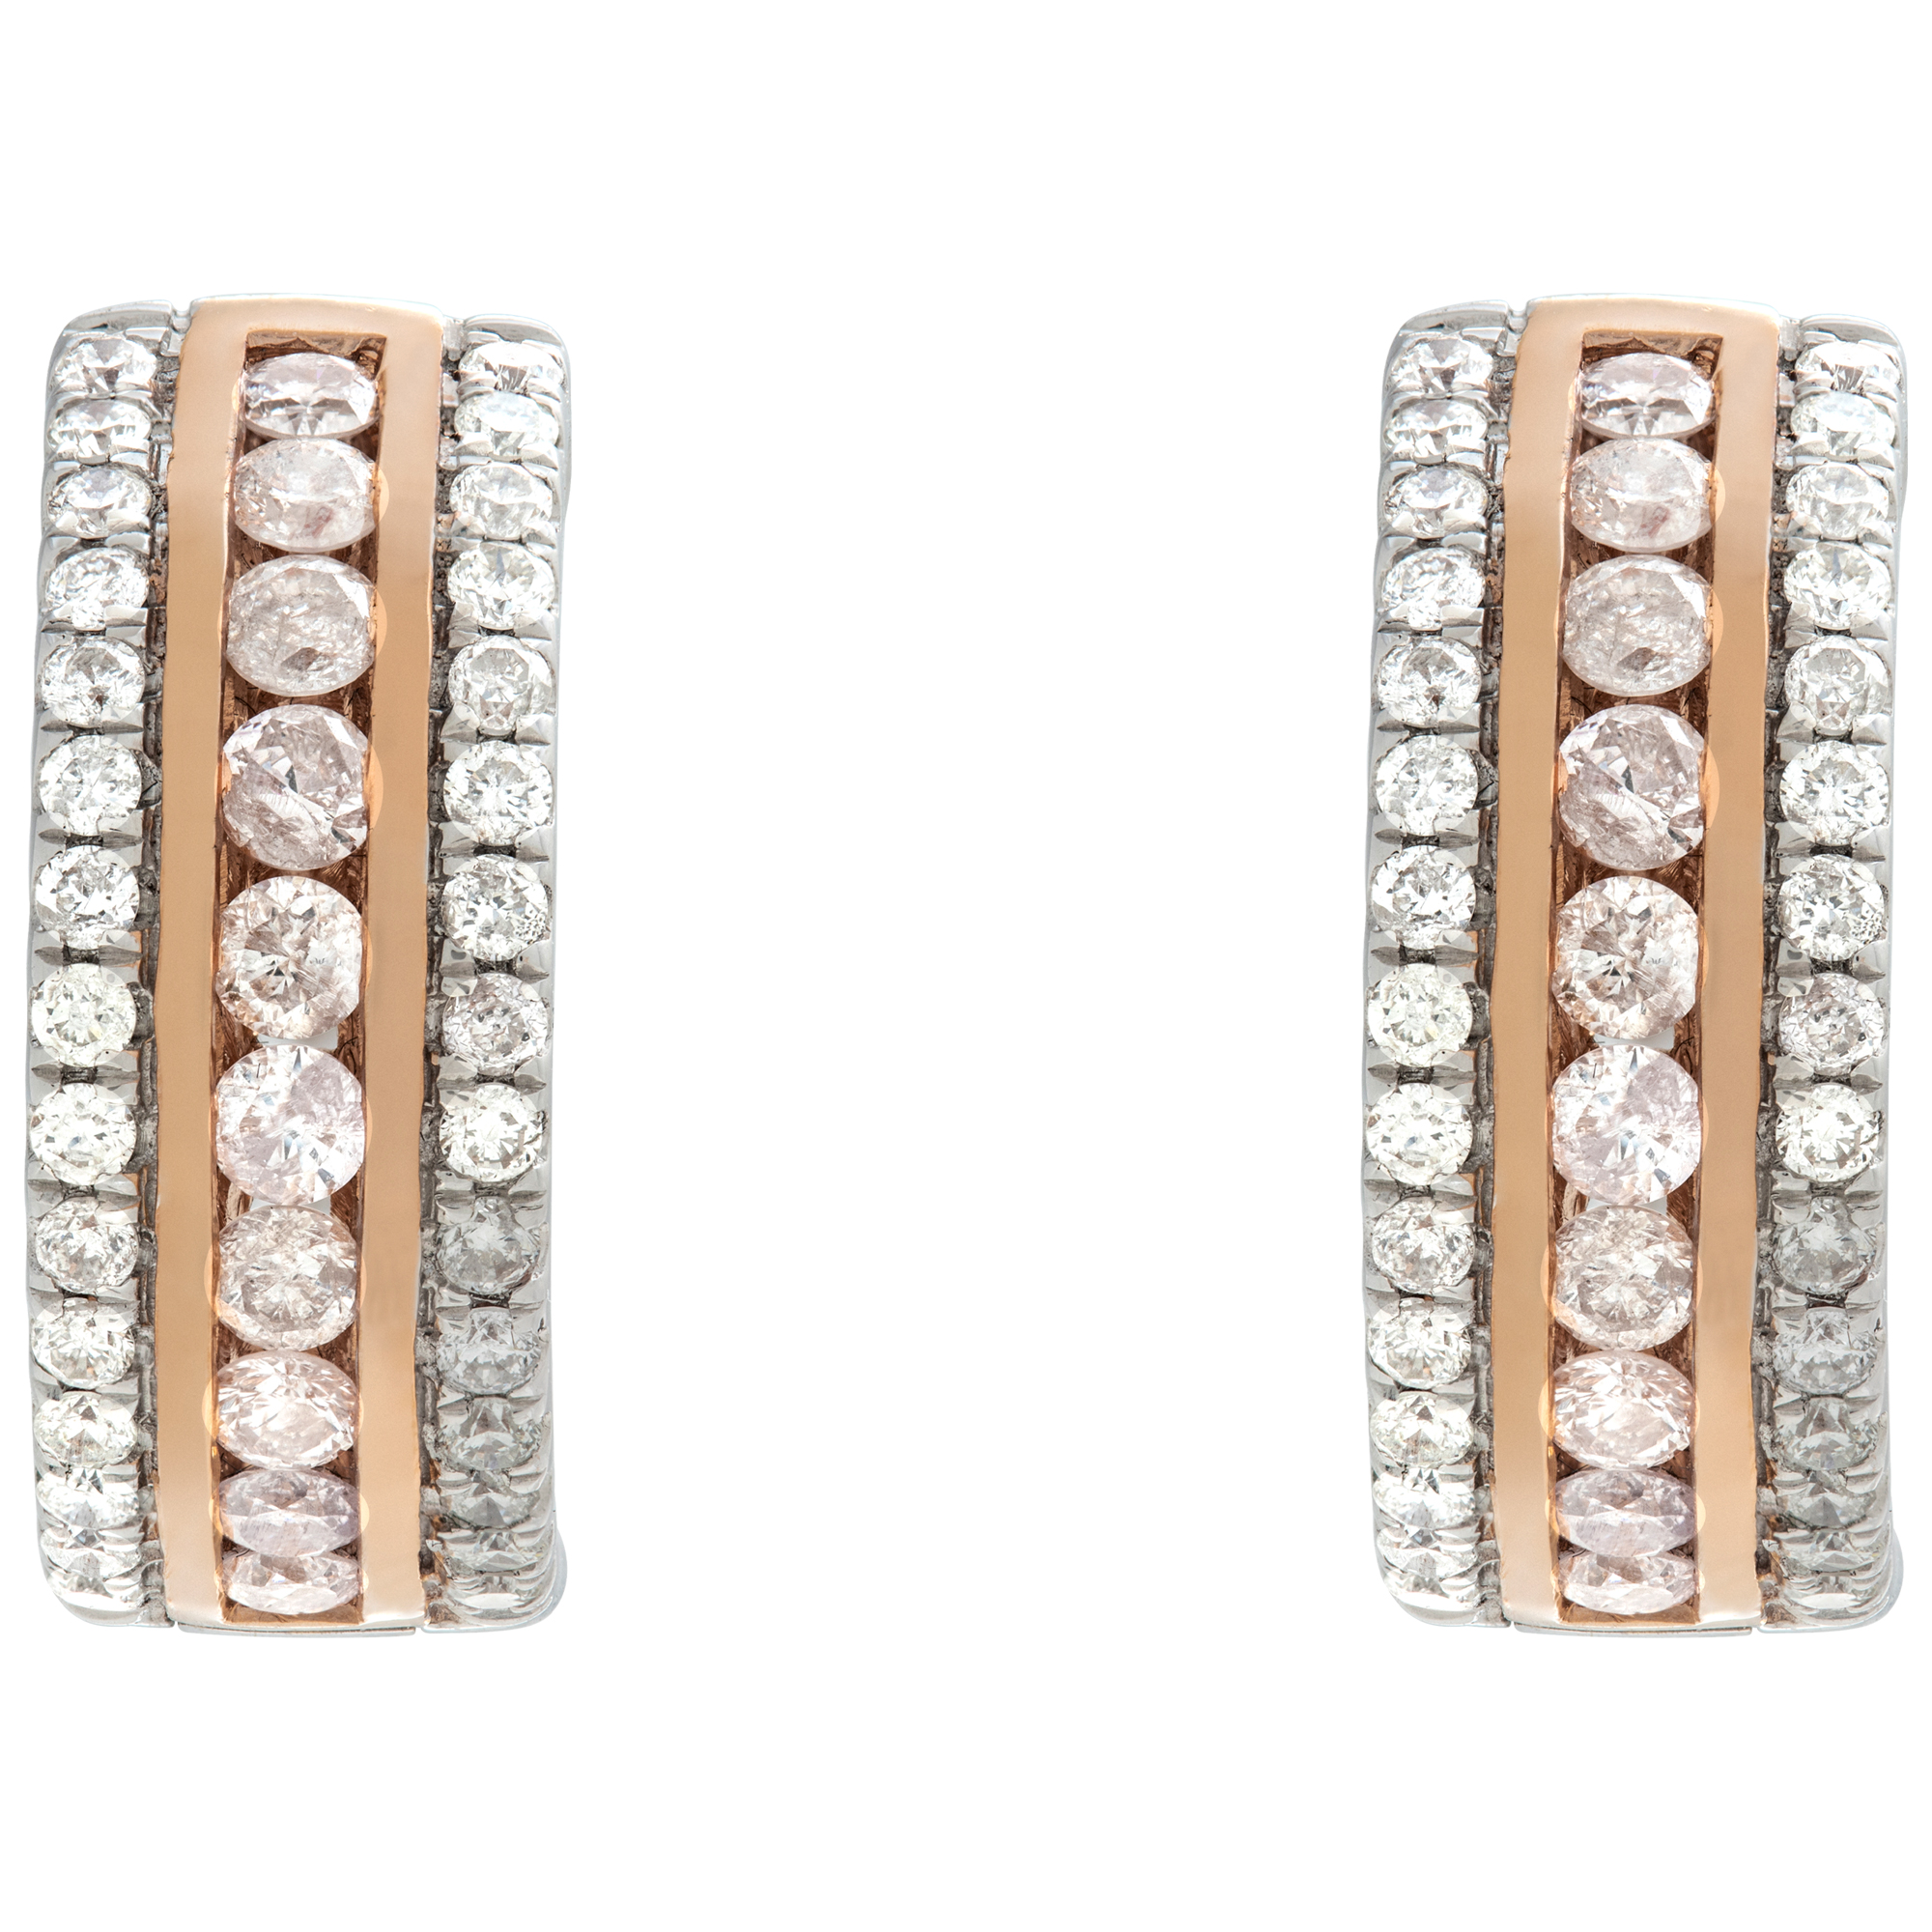 White and pink diamond huggie earrings in 18k white and rose gold.